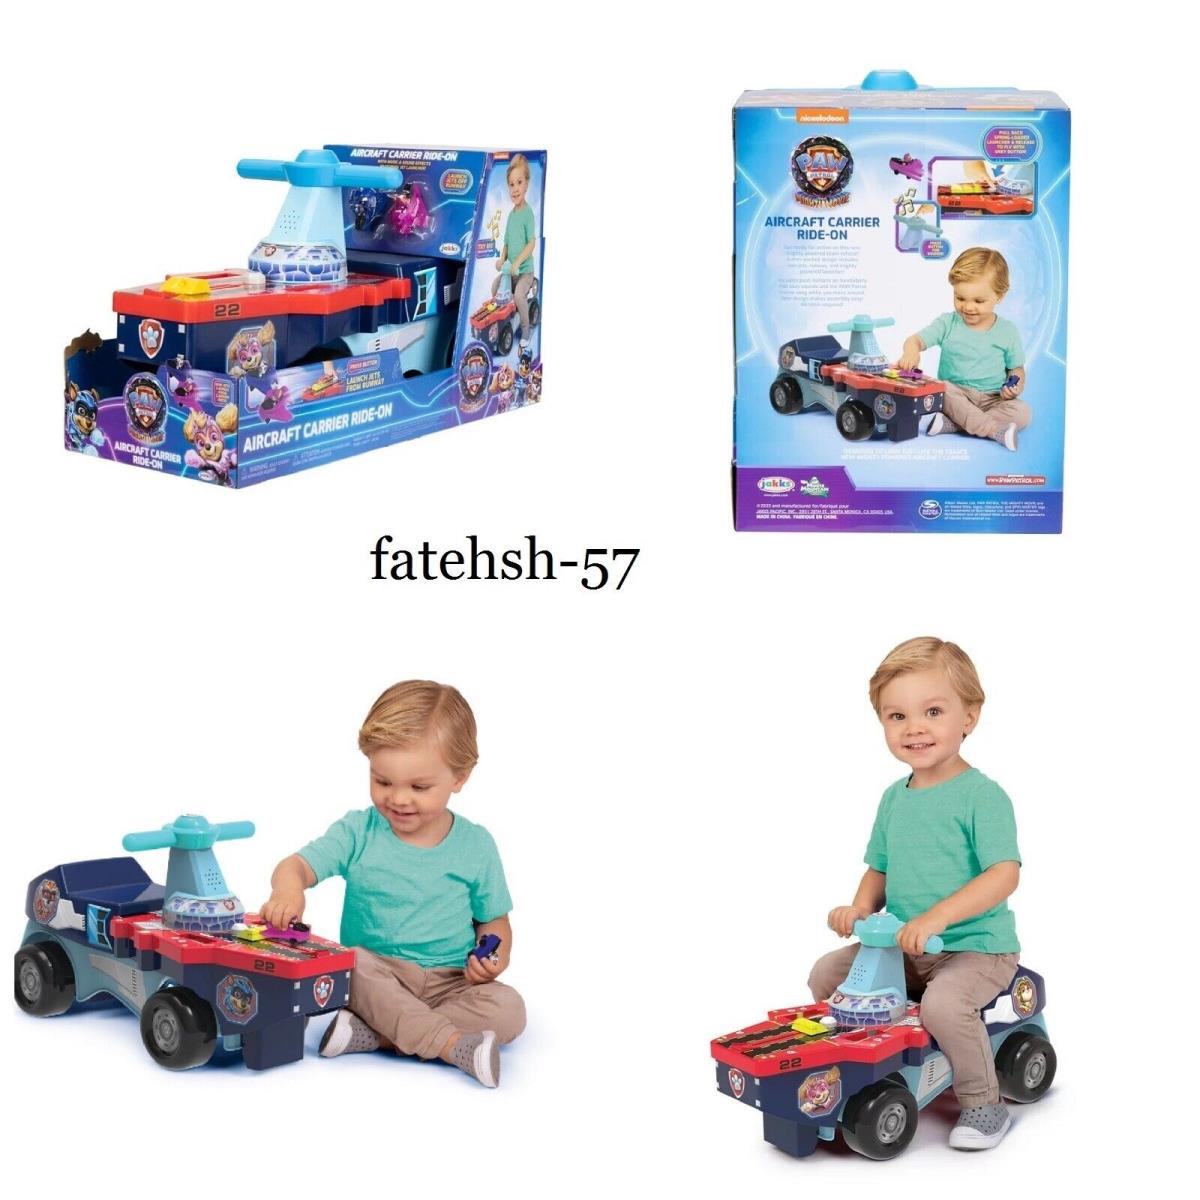 Paw Patrol Aircraft Carrier Ride on with Two Launchable Jet Vehicles Multicolor